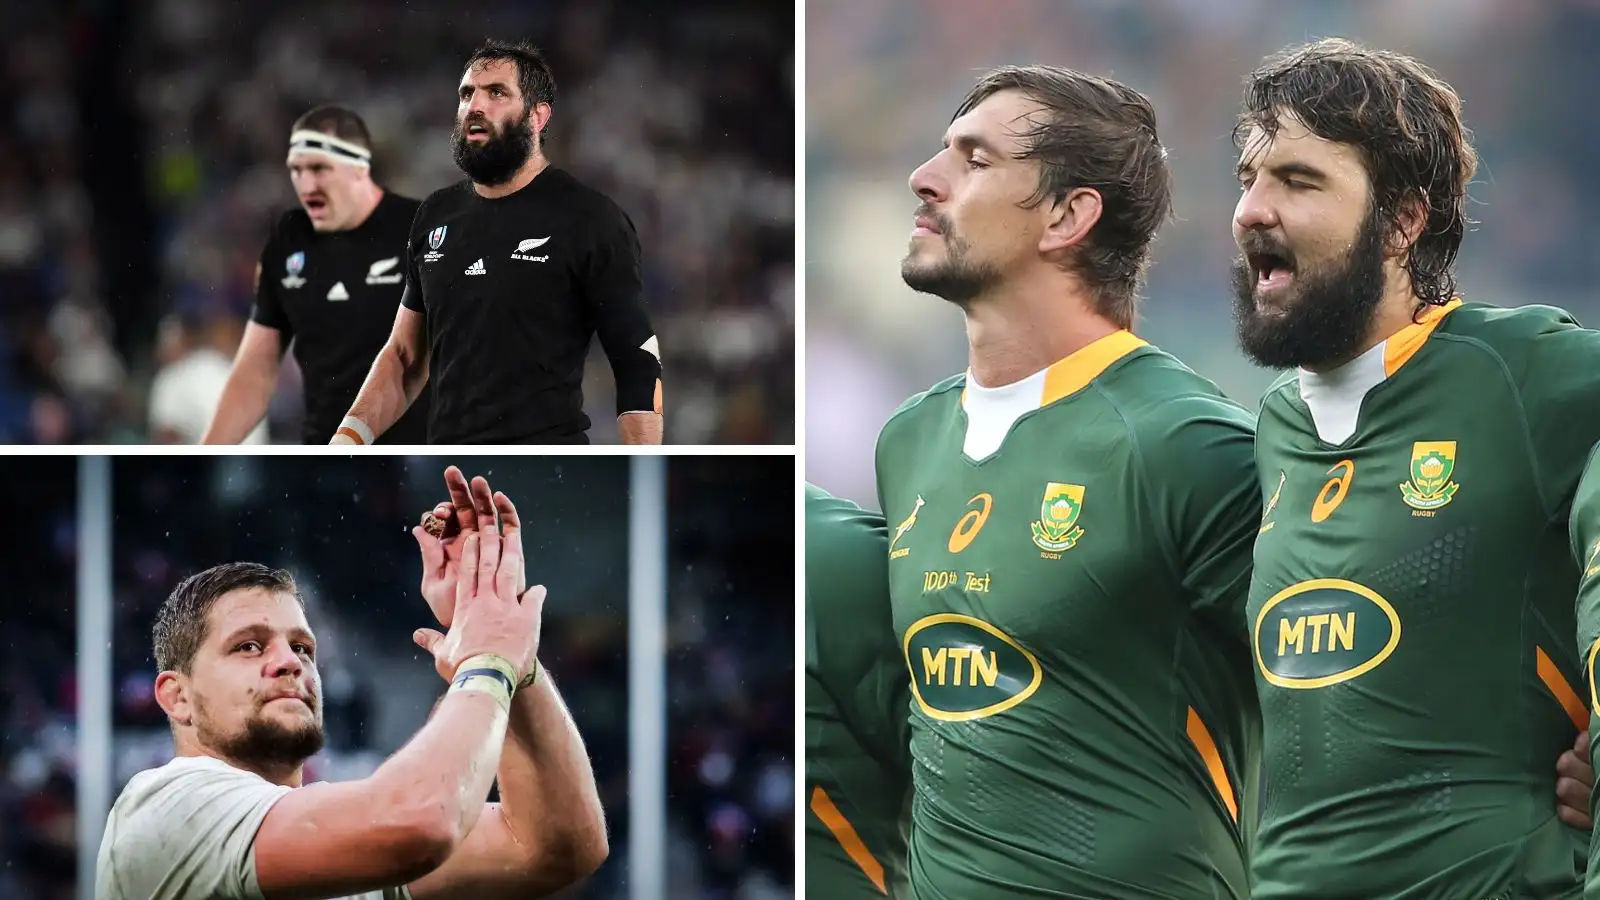 ranked Planet Rugby takes a deep dive into the top lock pairings in the sport to measure who has the advantage in the lead-up to the Rugby World Cup.